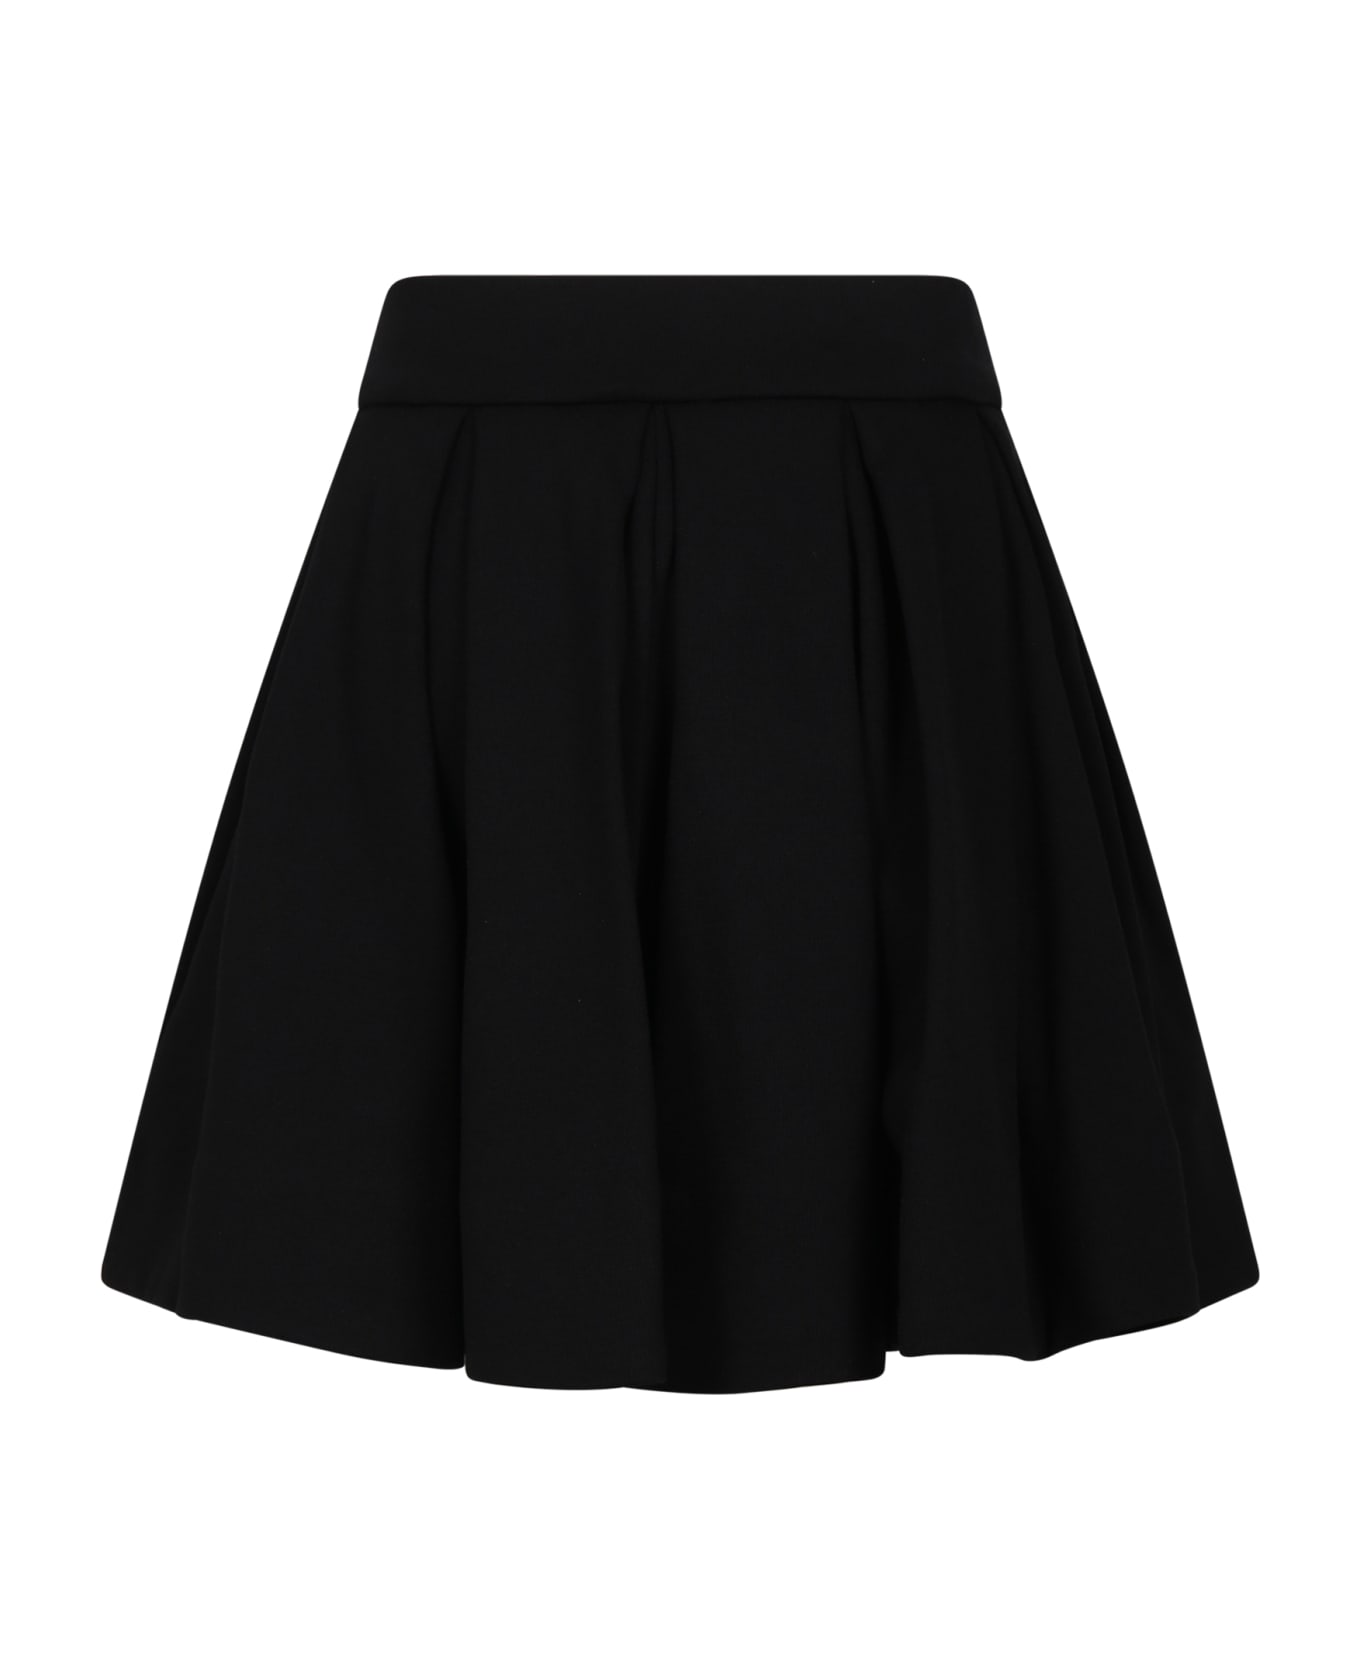 Balmain Black Skirt For Girl With Iconic Buttons - Black ボトムス